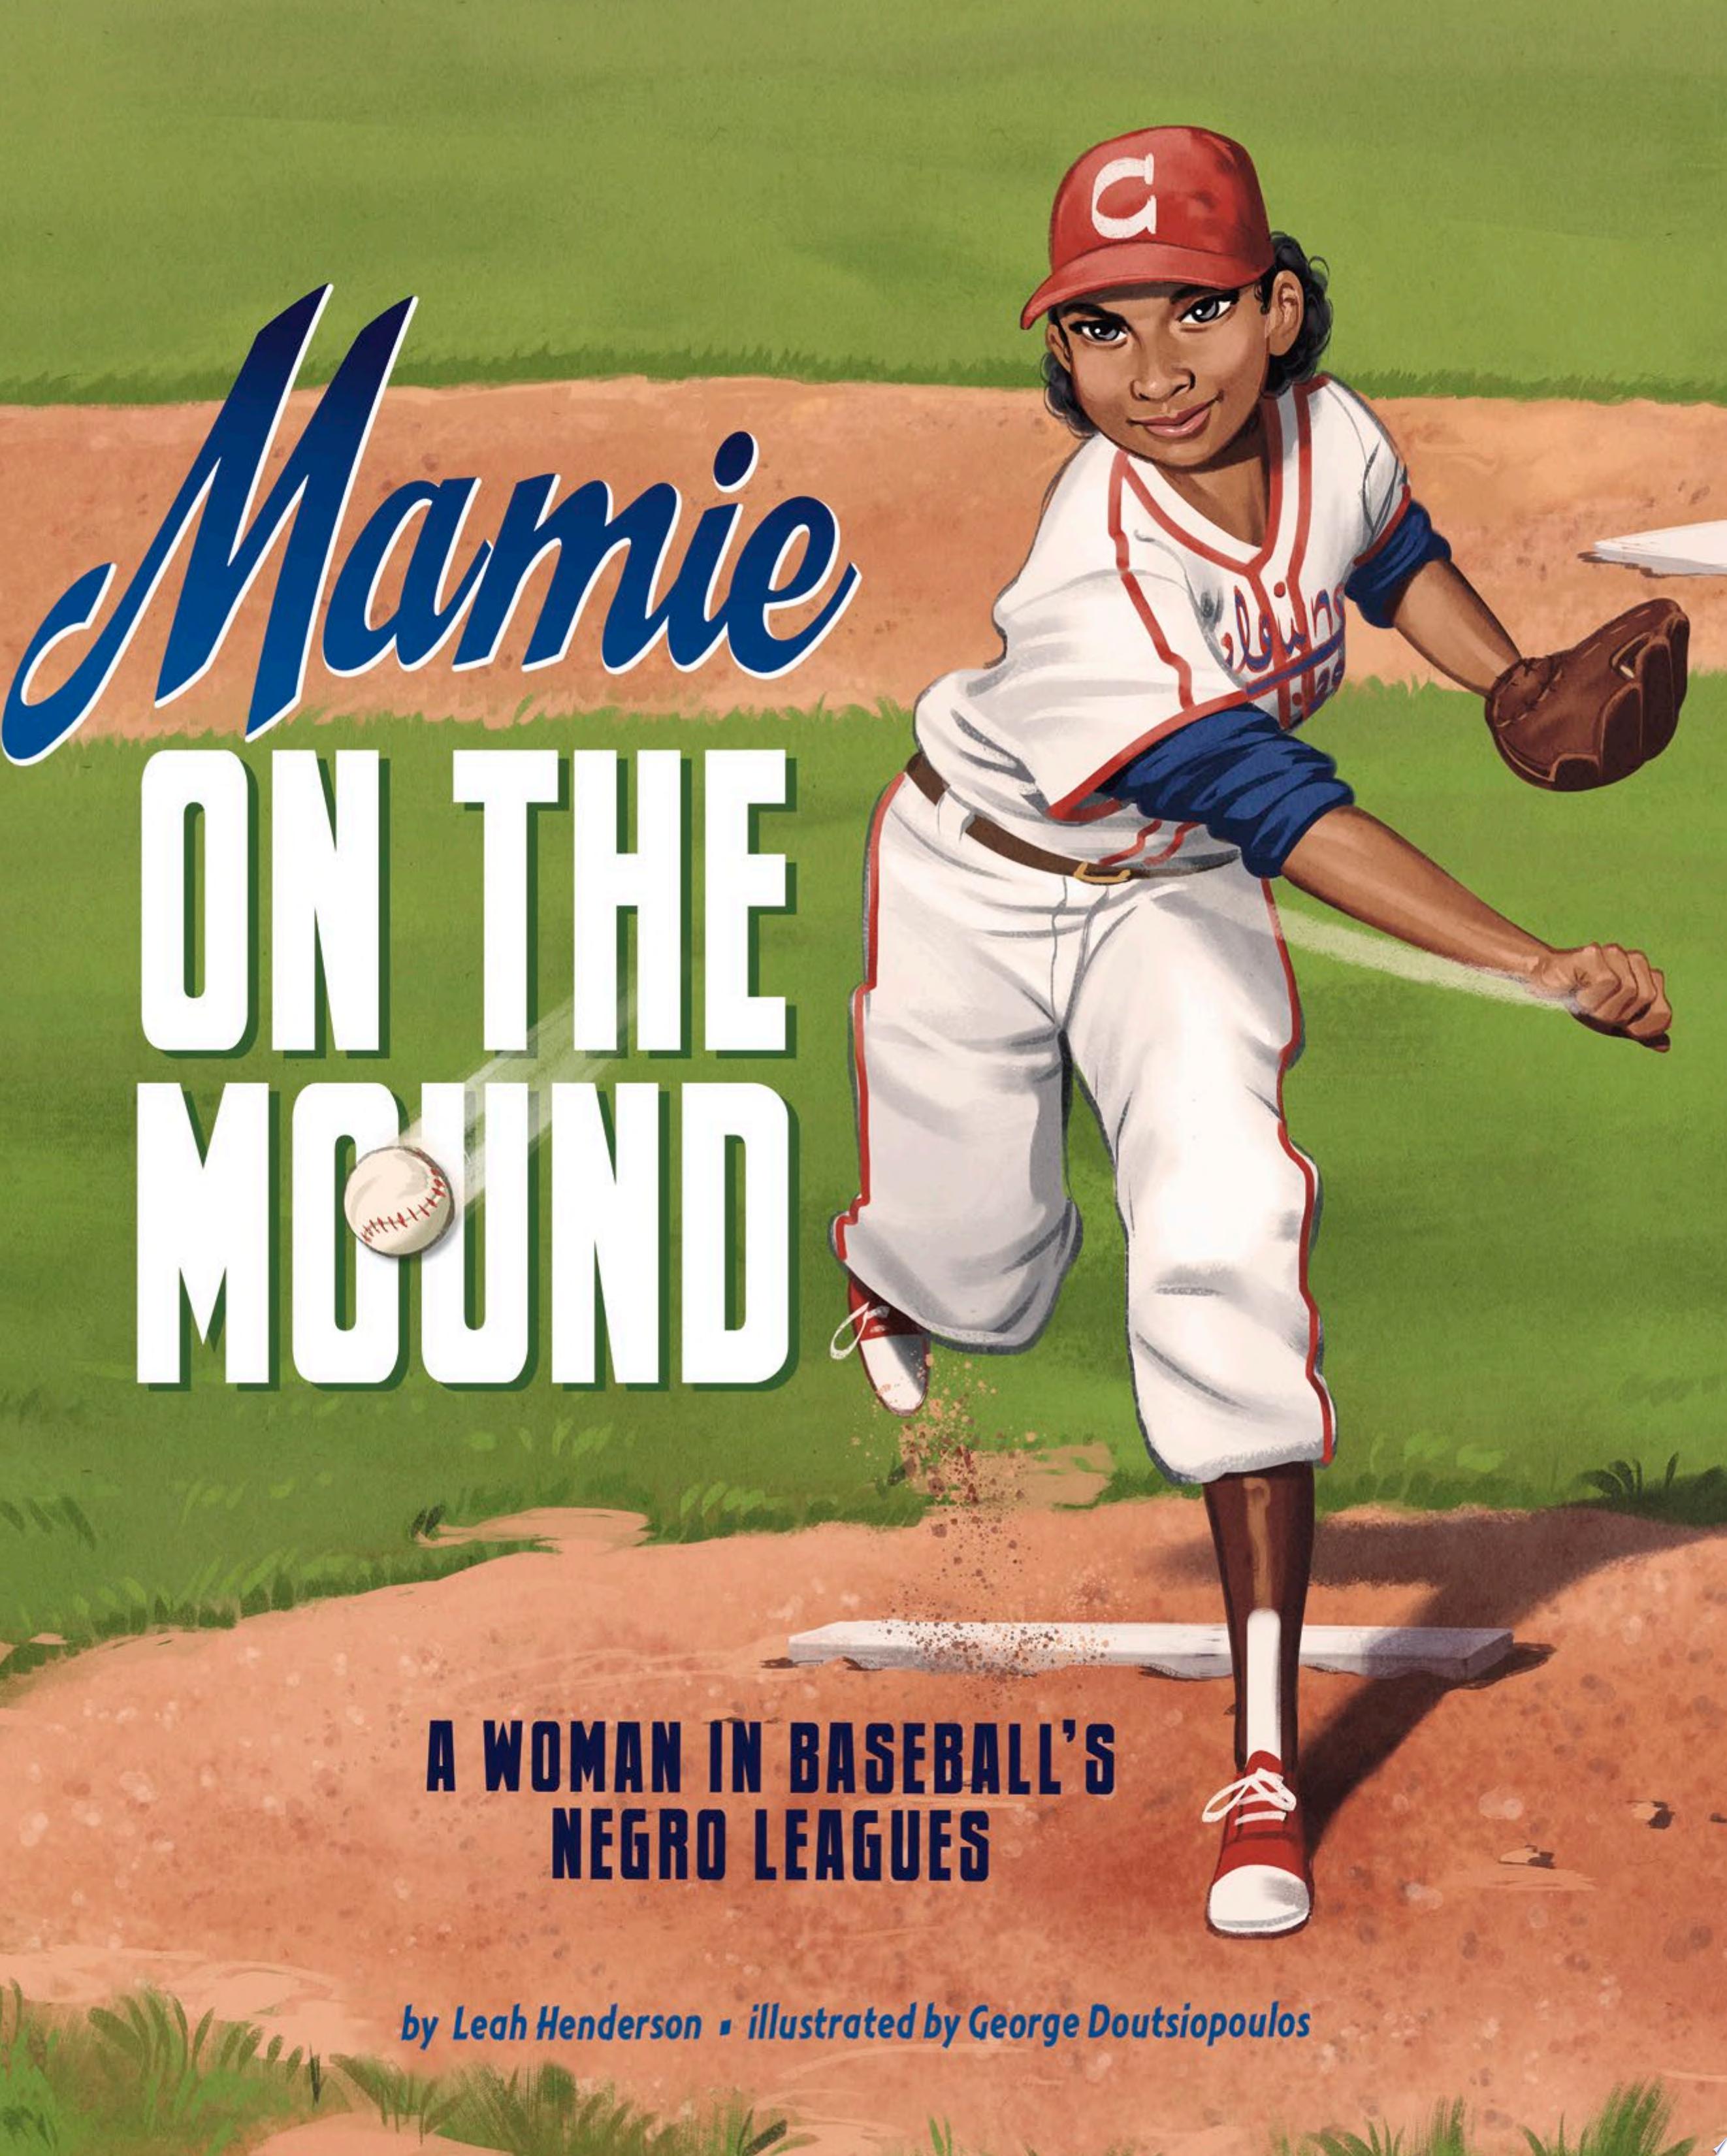 Image for "Mamie on the Mound"